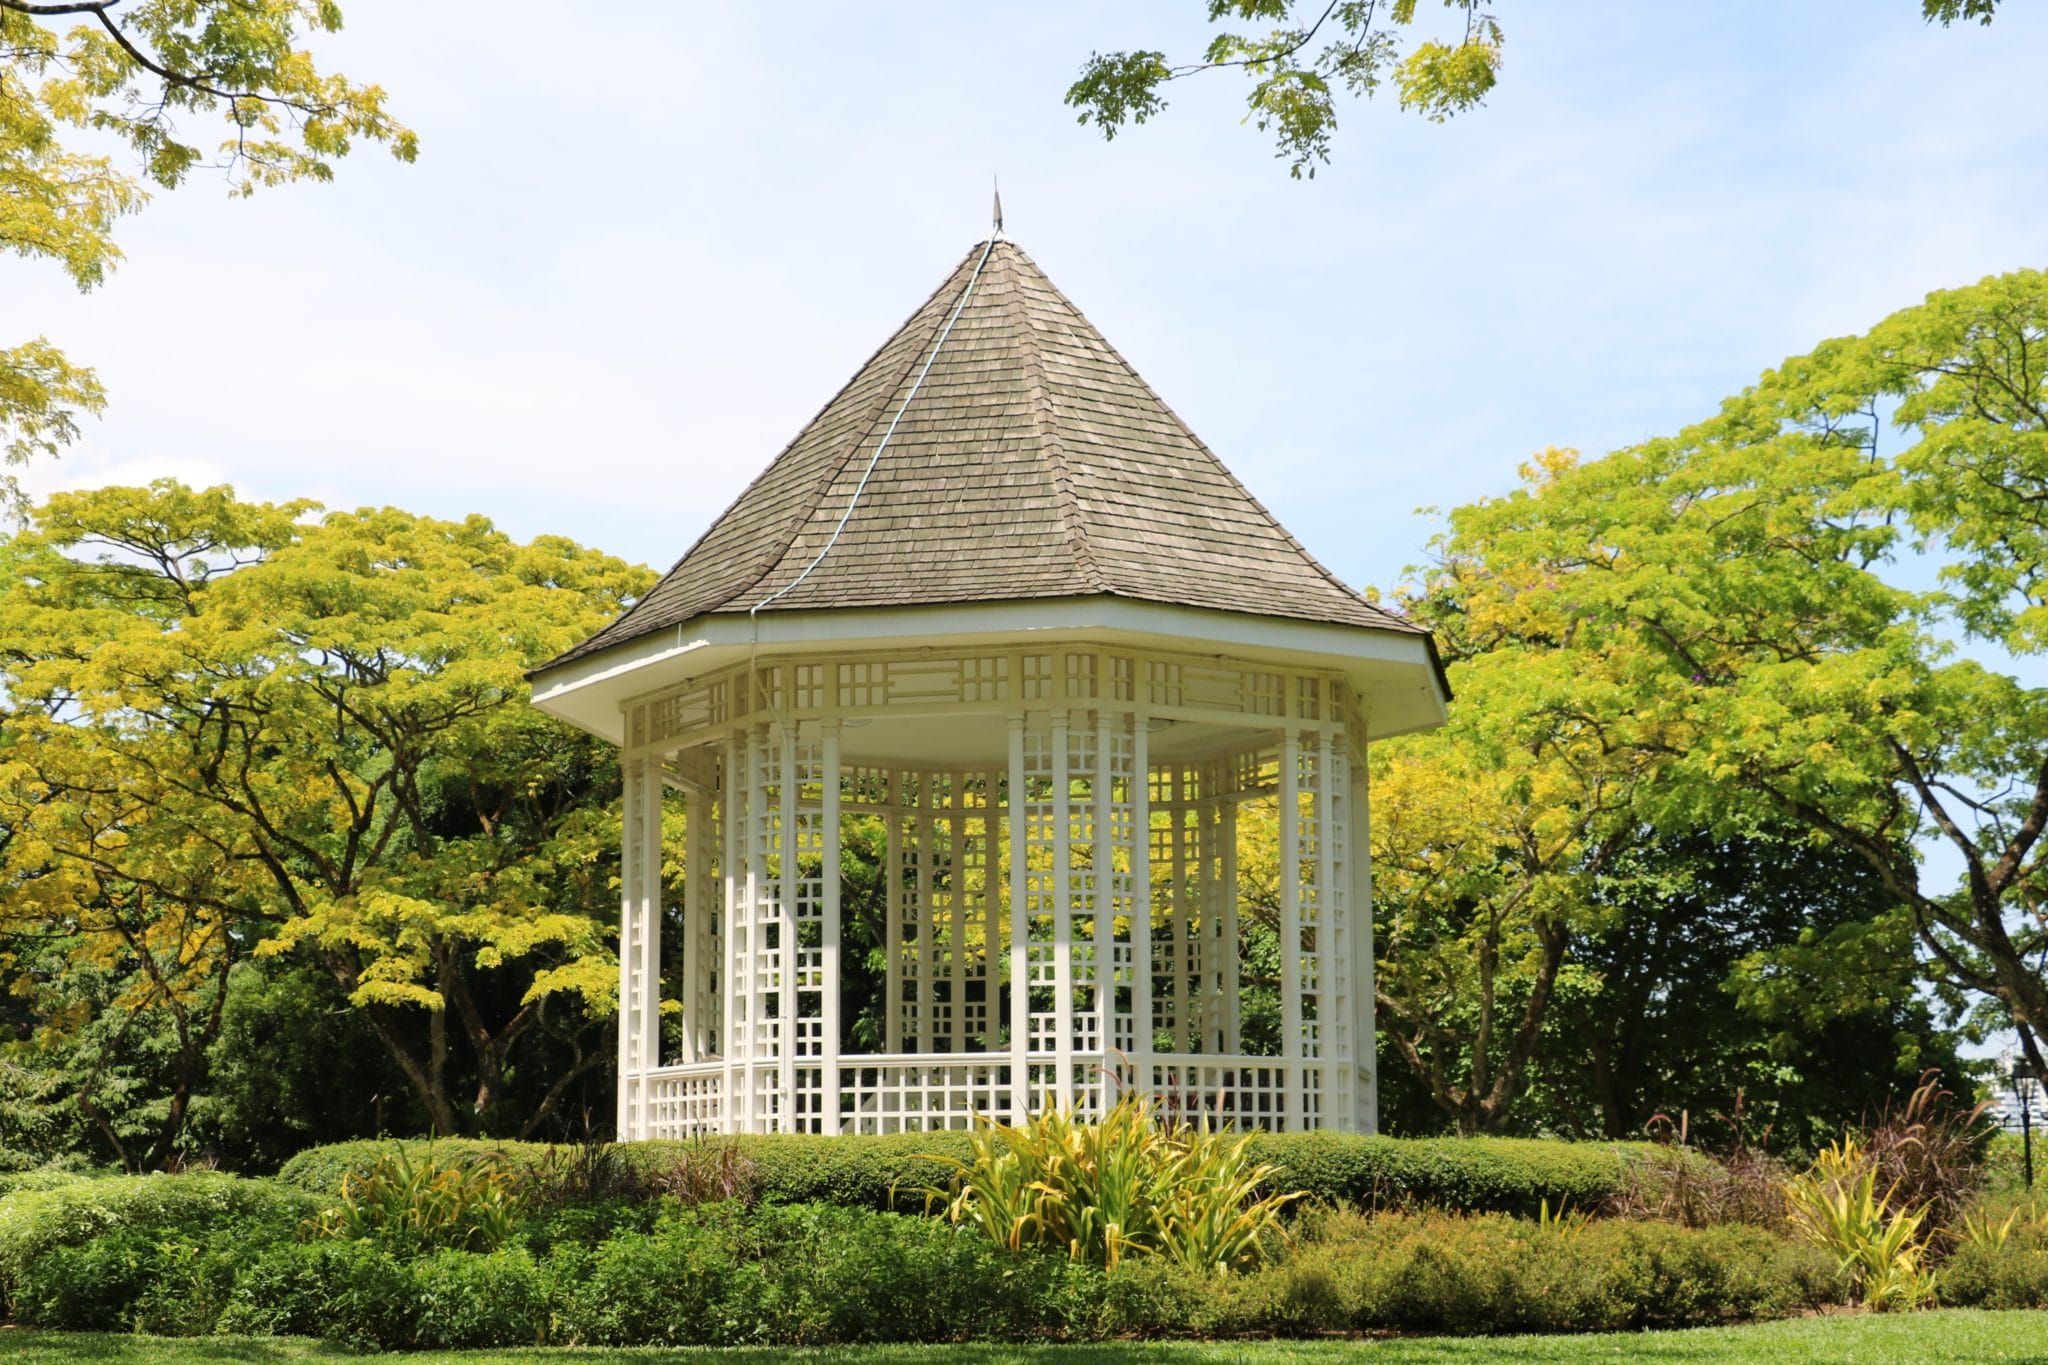 When you add features like designer gazebos to your outdoor living space, you gain more in your daily lifestyle.